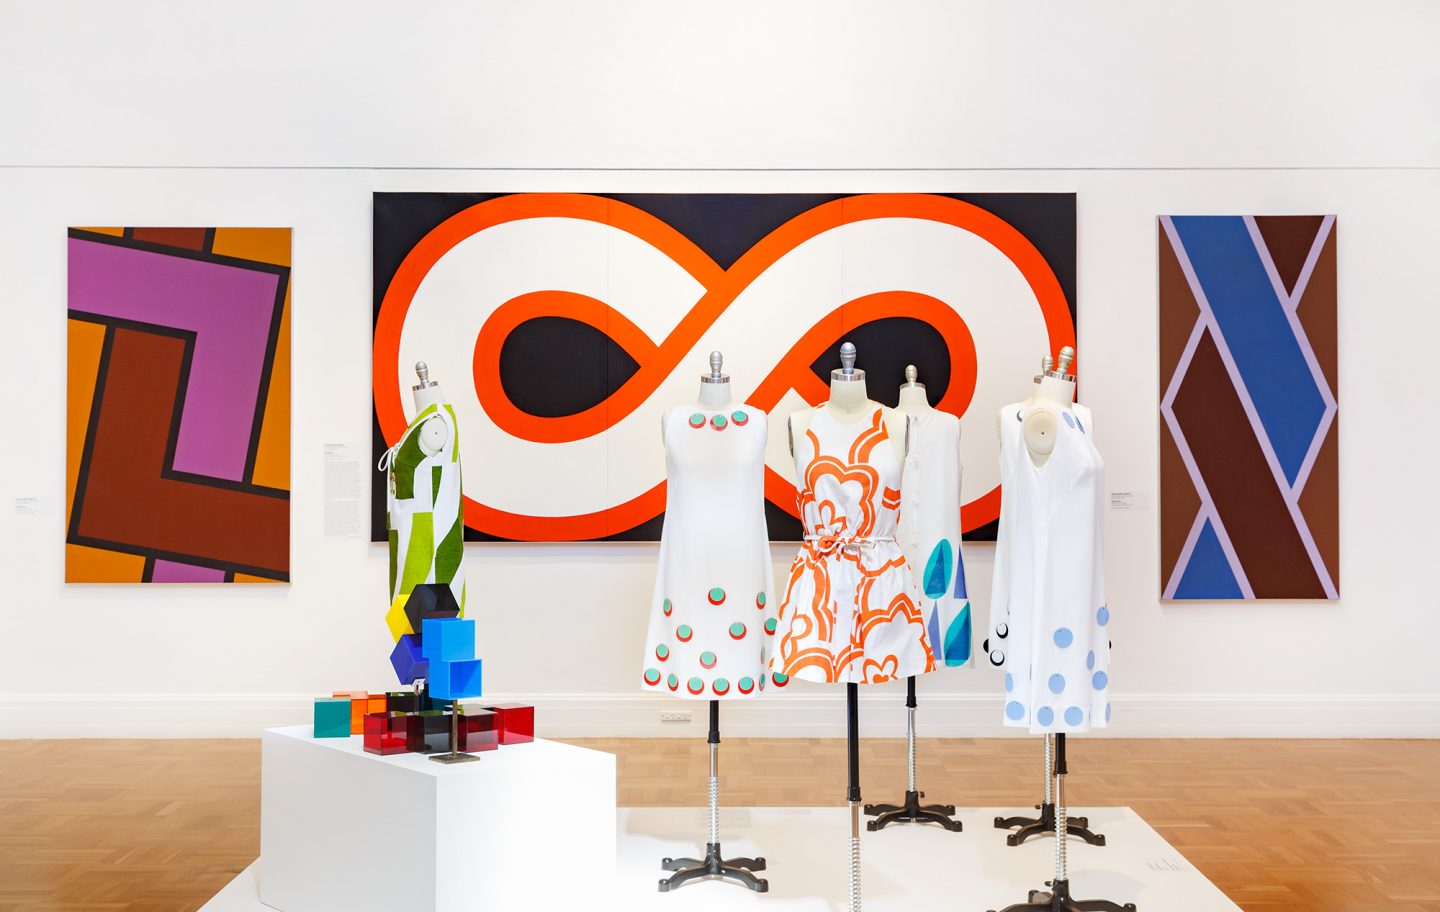 Installation view: Adelaide cool, Art Gallery of South Australia, Adelaide, 2019